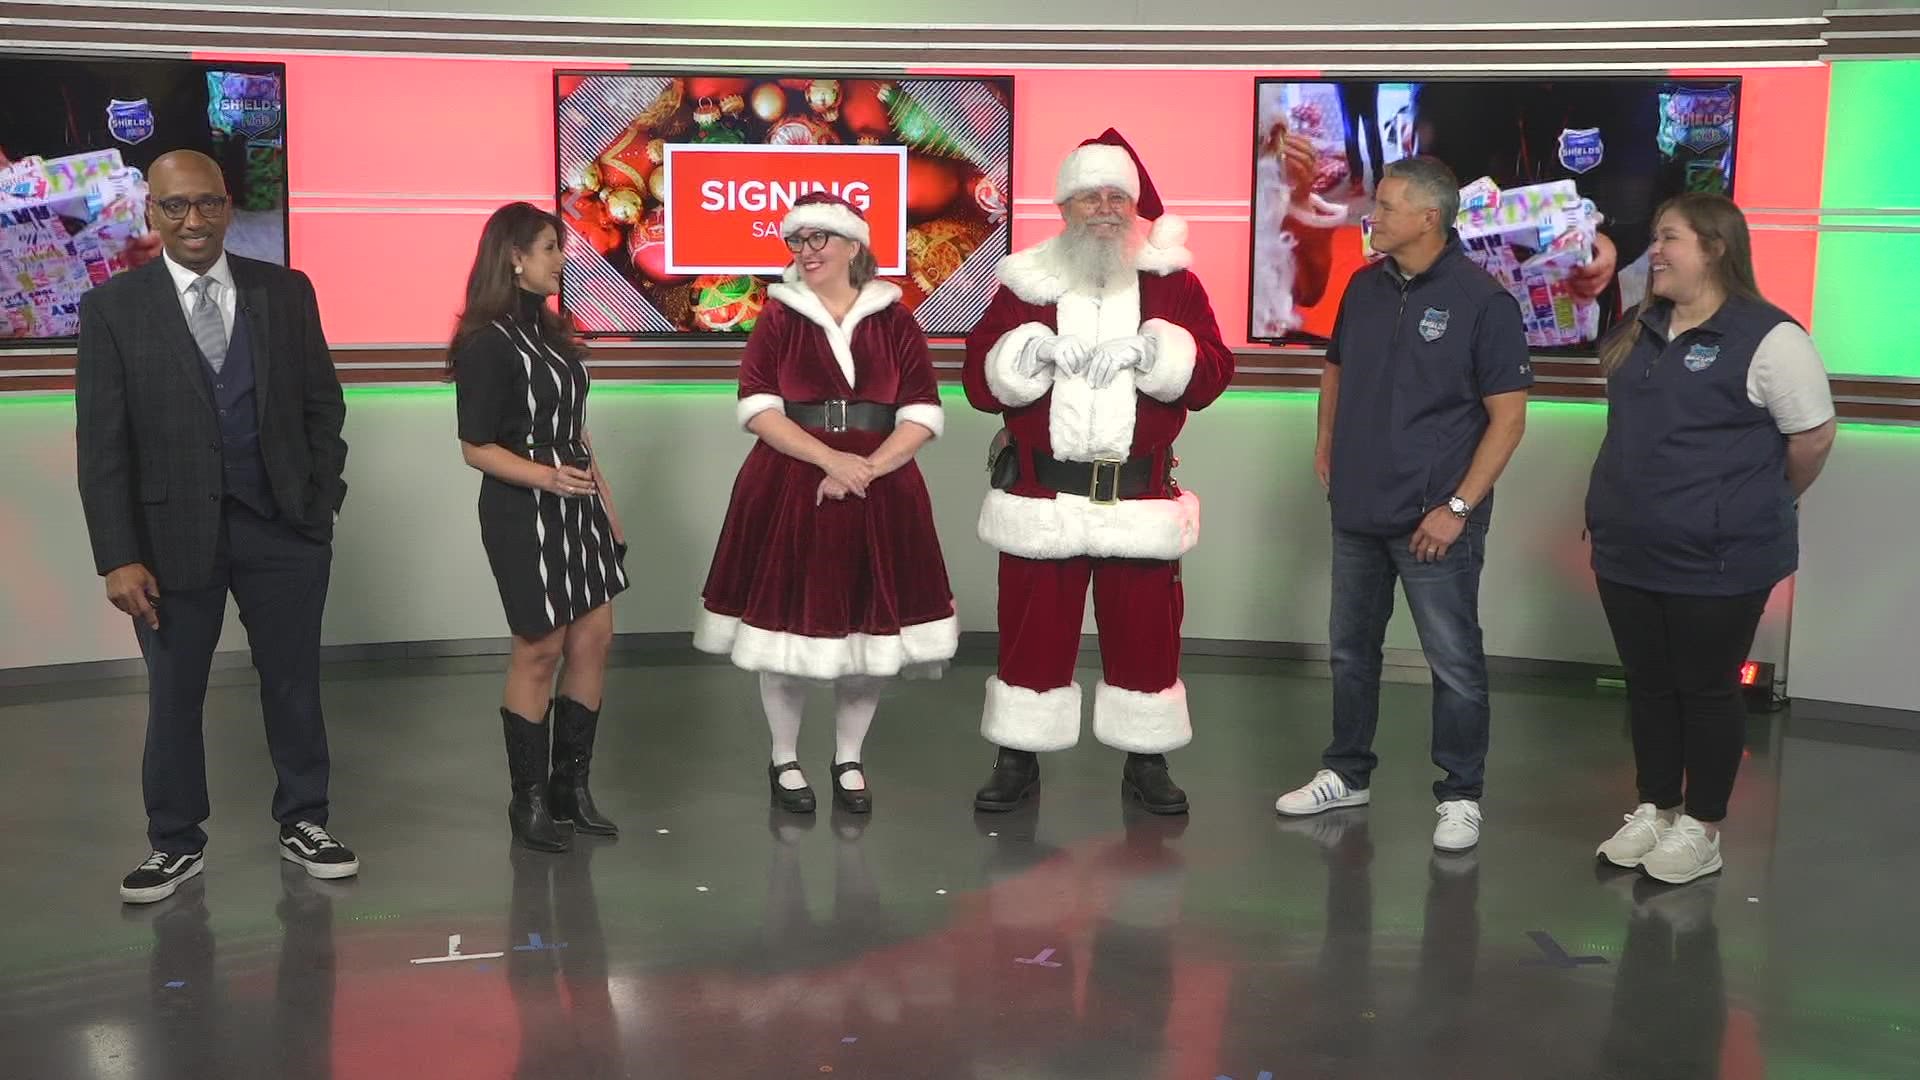 The goal of a special event happening in San Antonio is to make sure every child has a memorable moment with Santa.